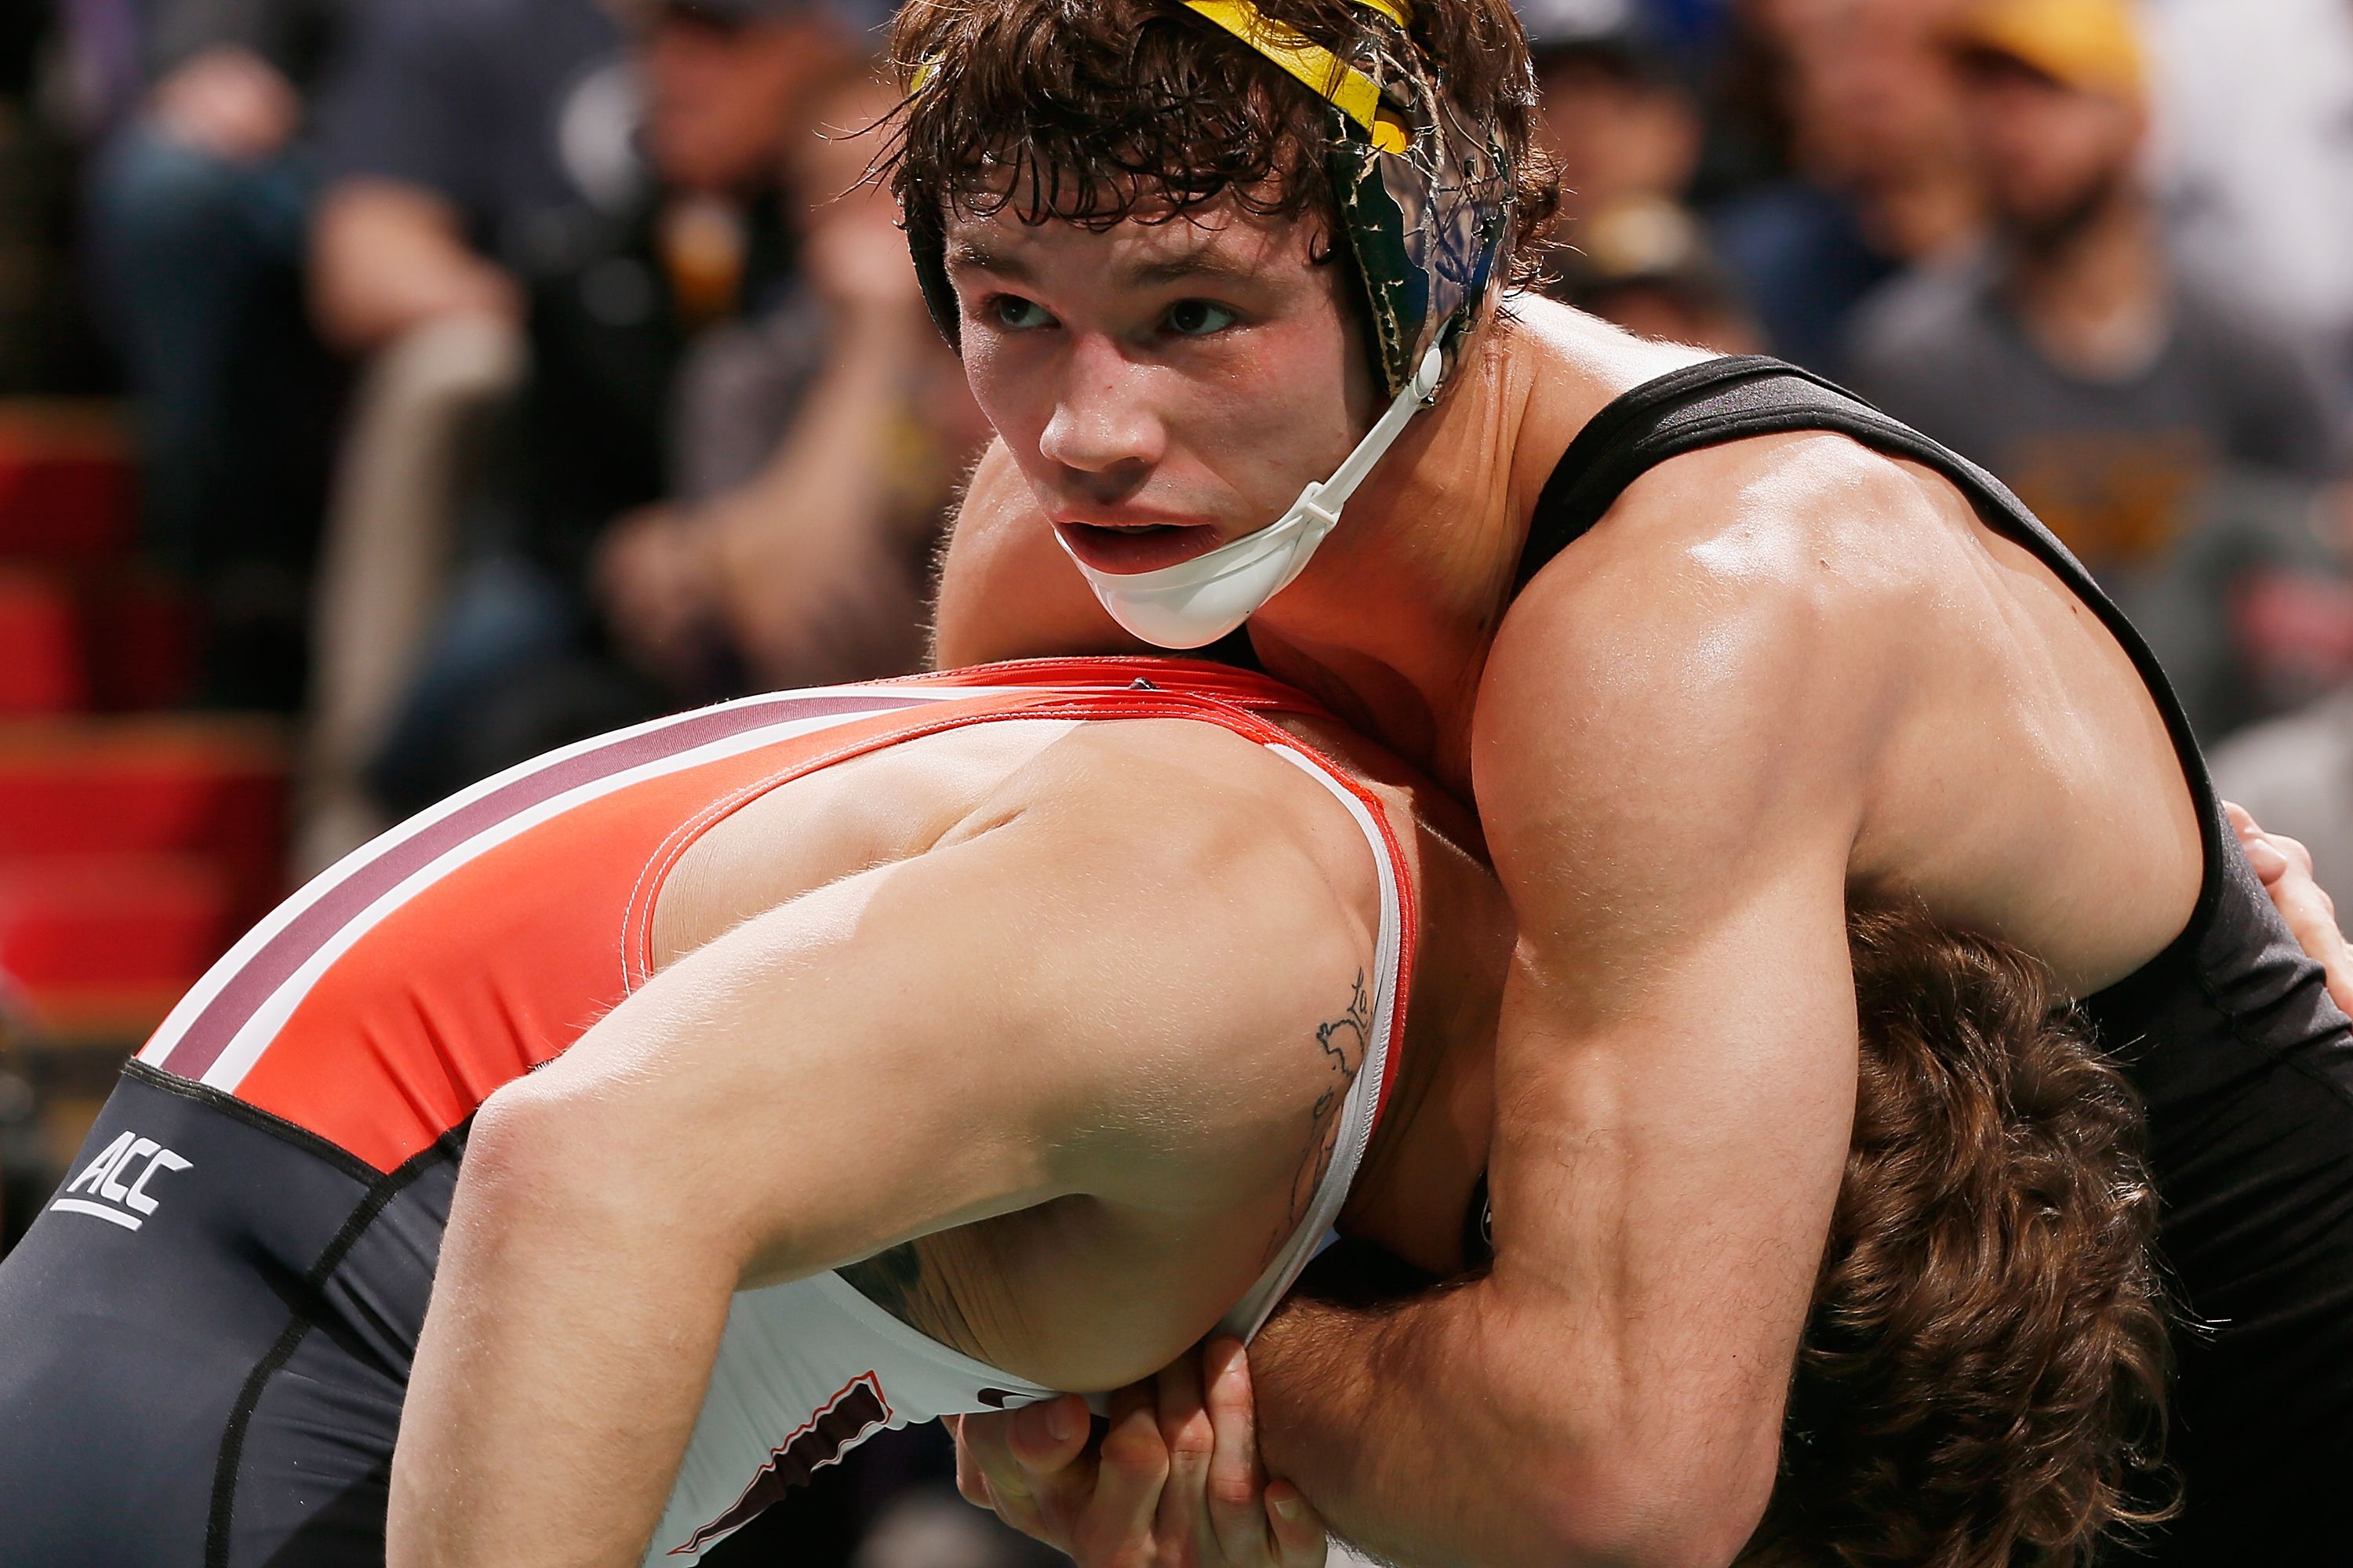 Thomas Gilman of Iowa grabs his opponent during a 125lb consolation match in St. Louis, Missouri. 